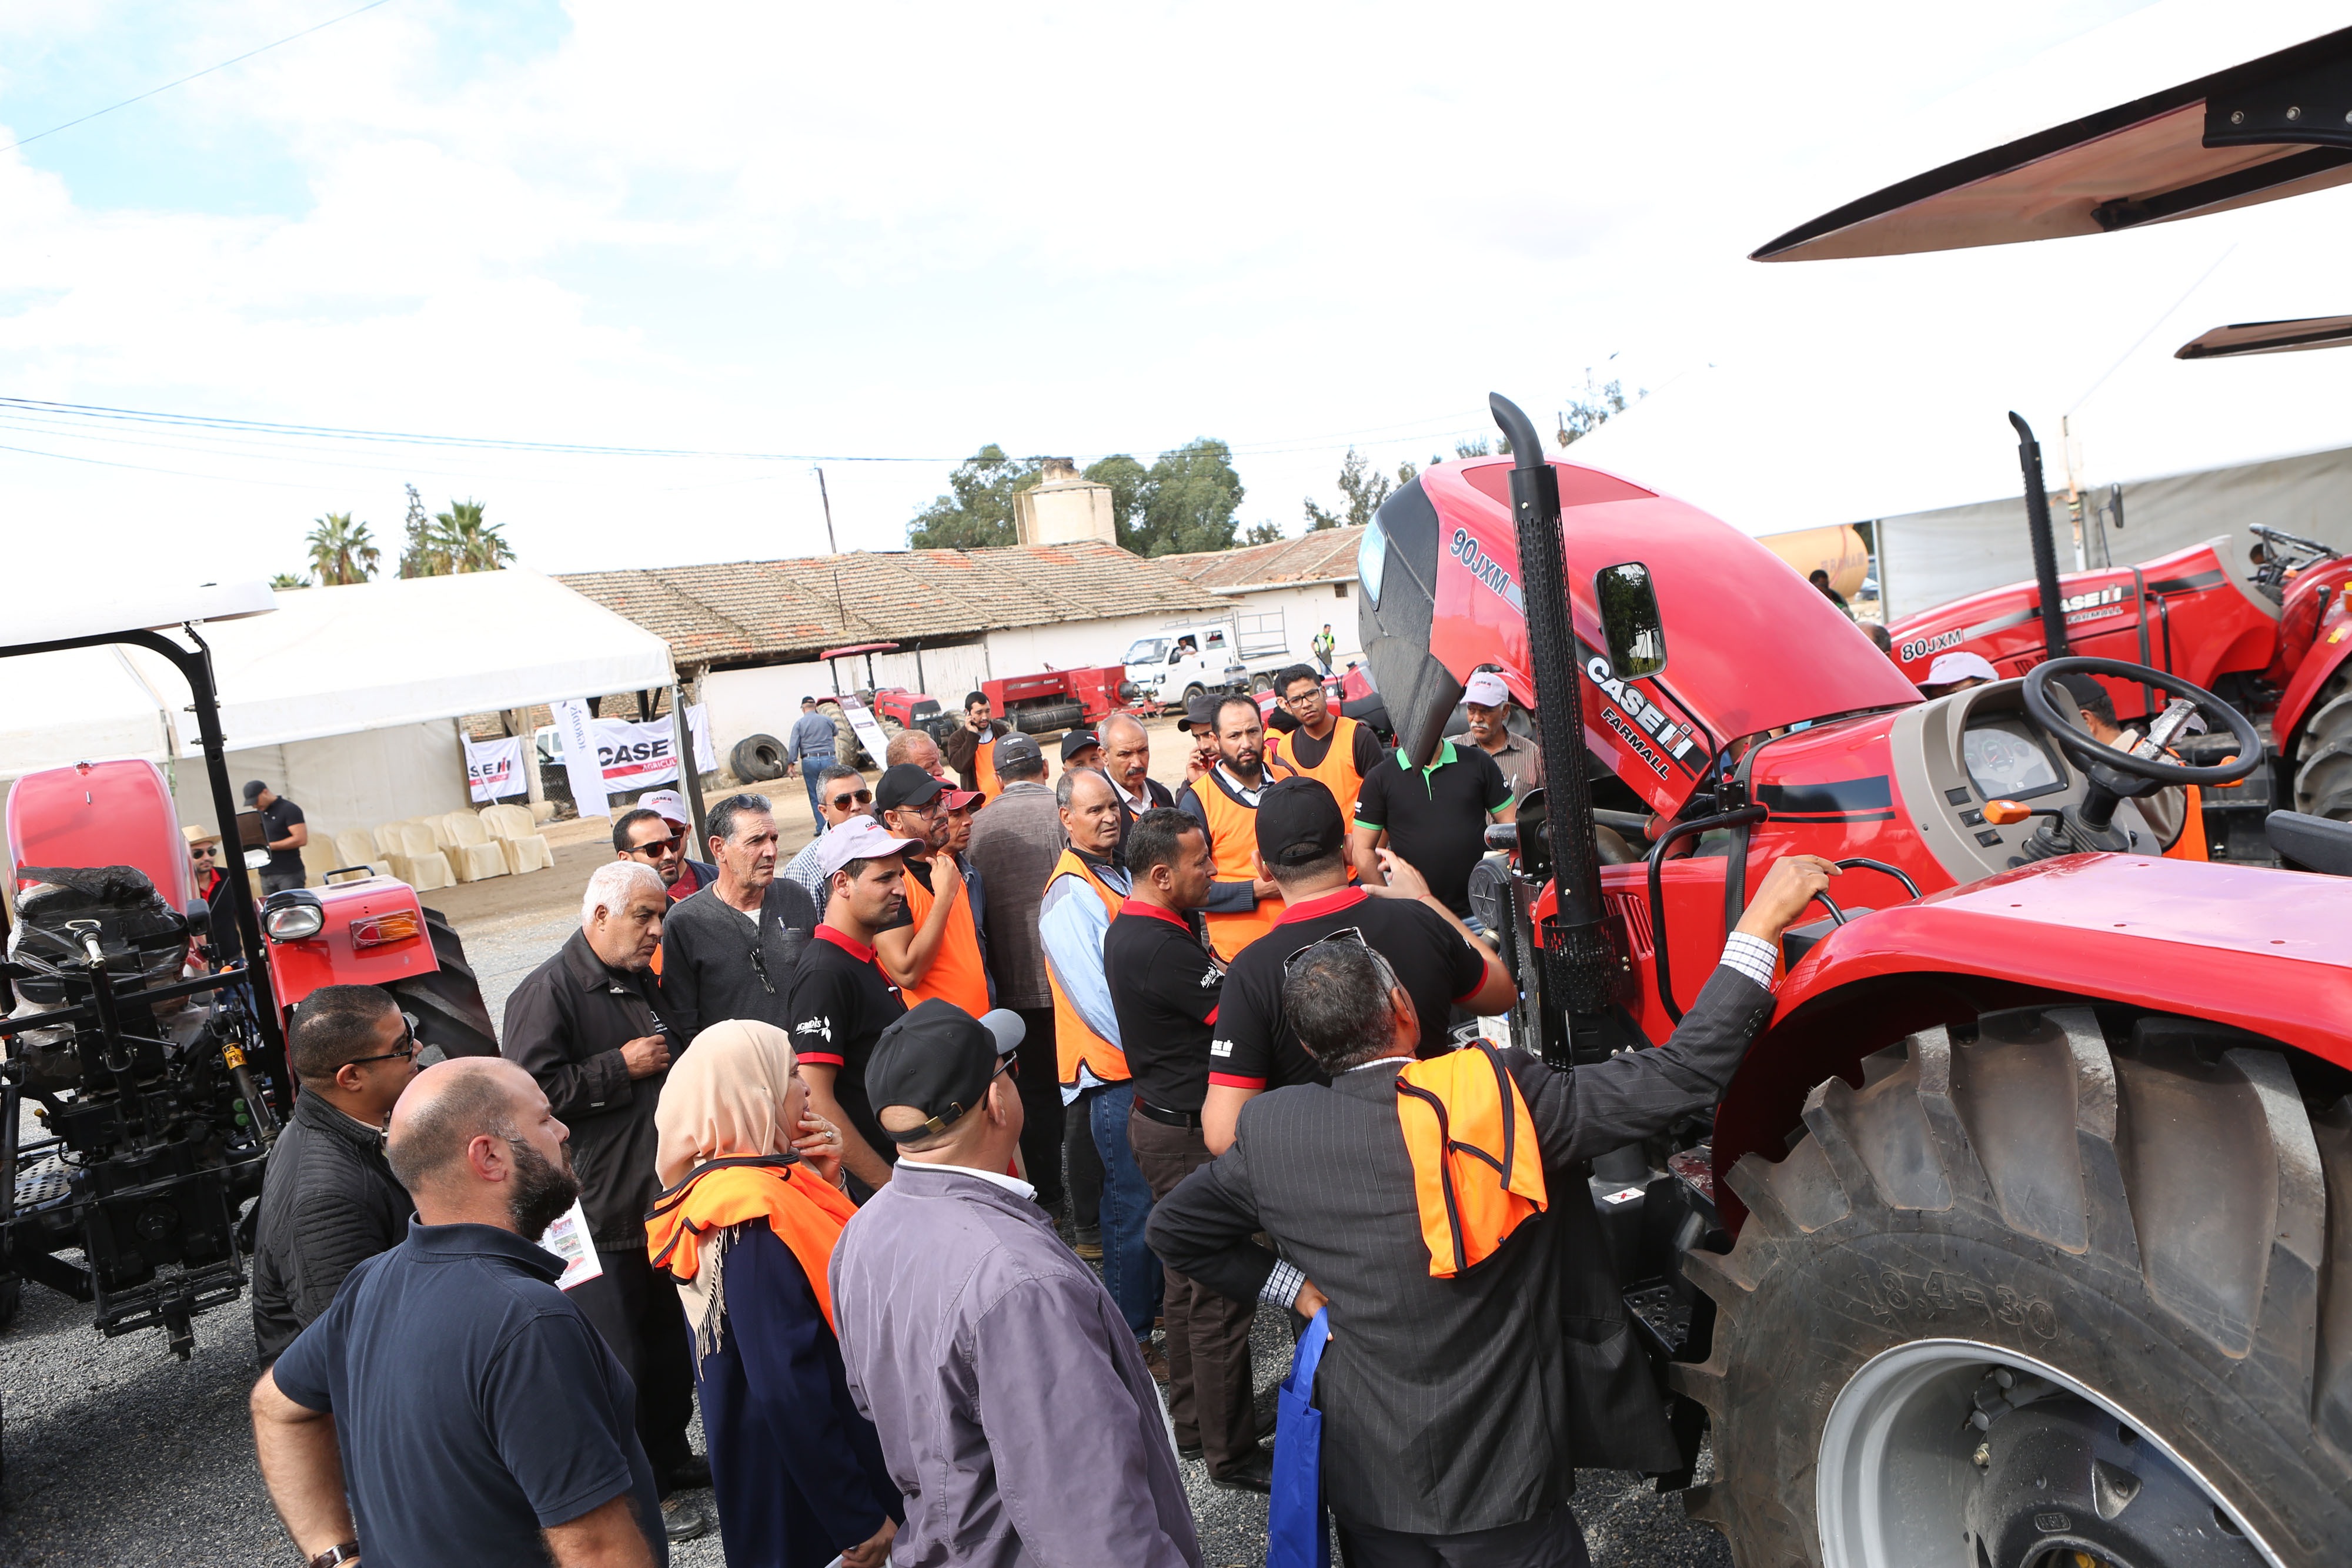 CASE IH FIELD DAY DEMONSTRATES THE POWER OF MECHANISATION FOR A PRODUCTIVE AND EFFICIENT AGRICULTURE